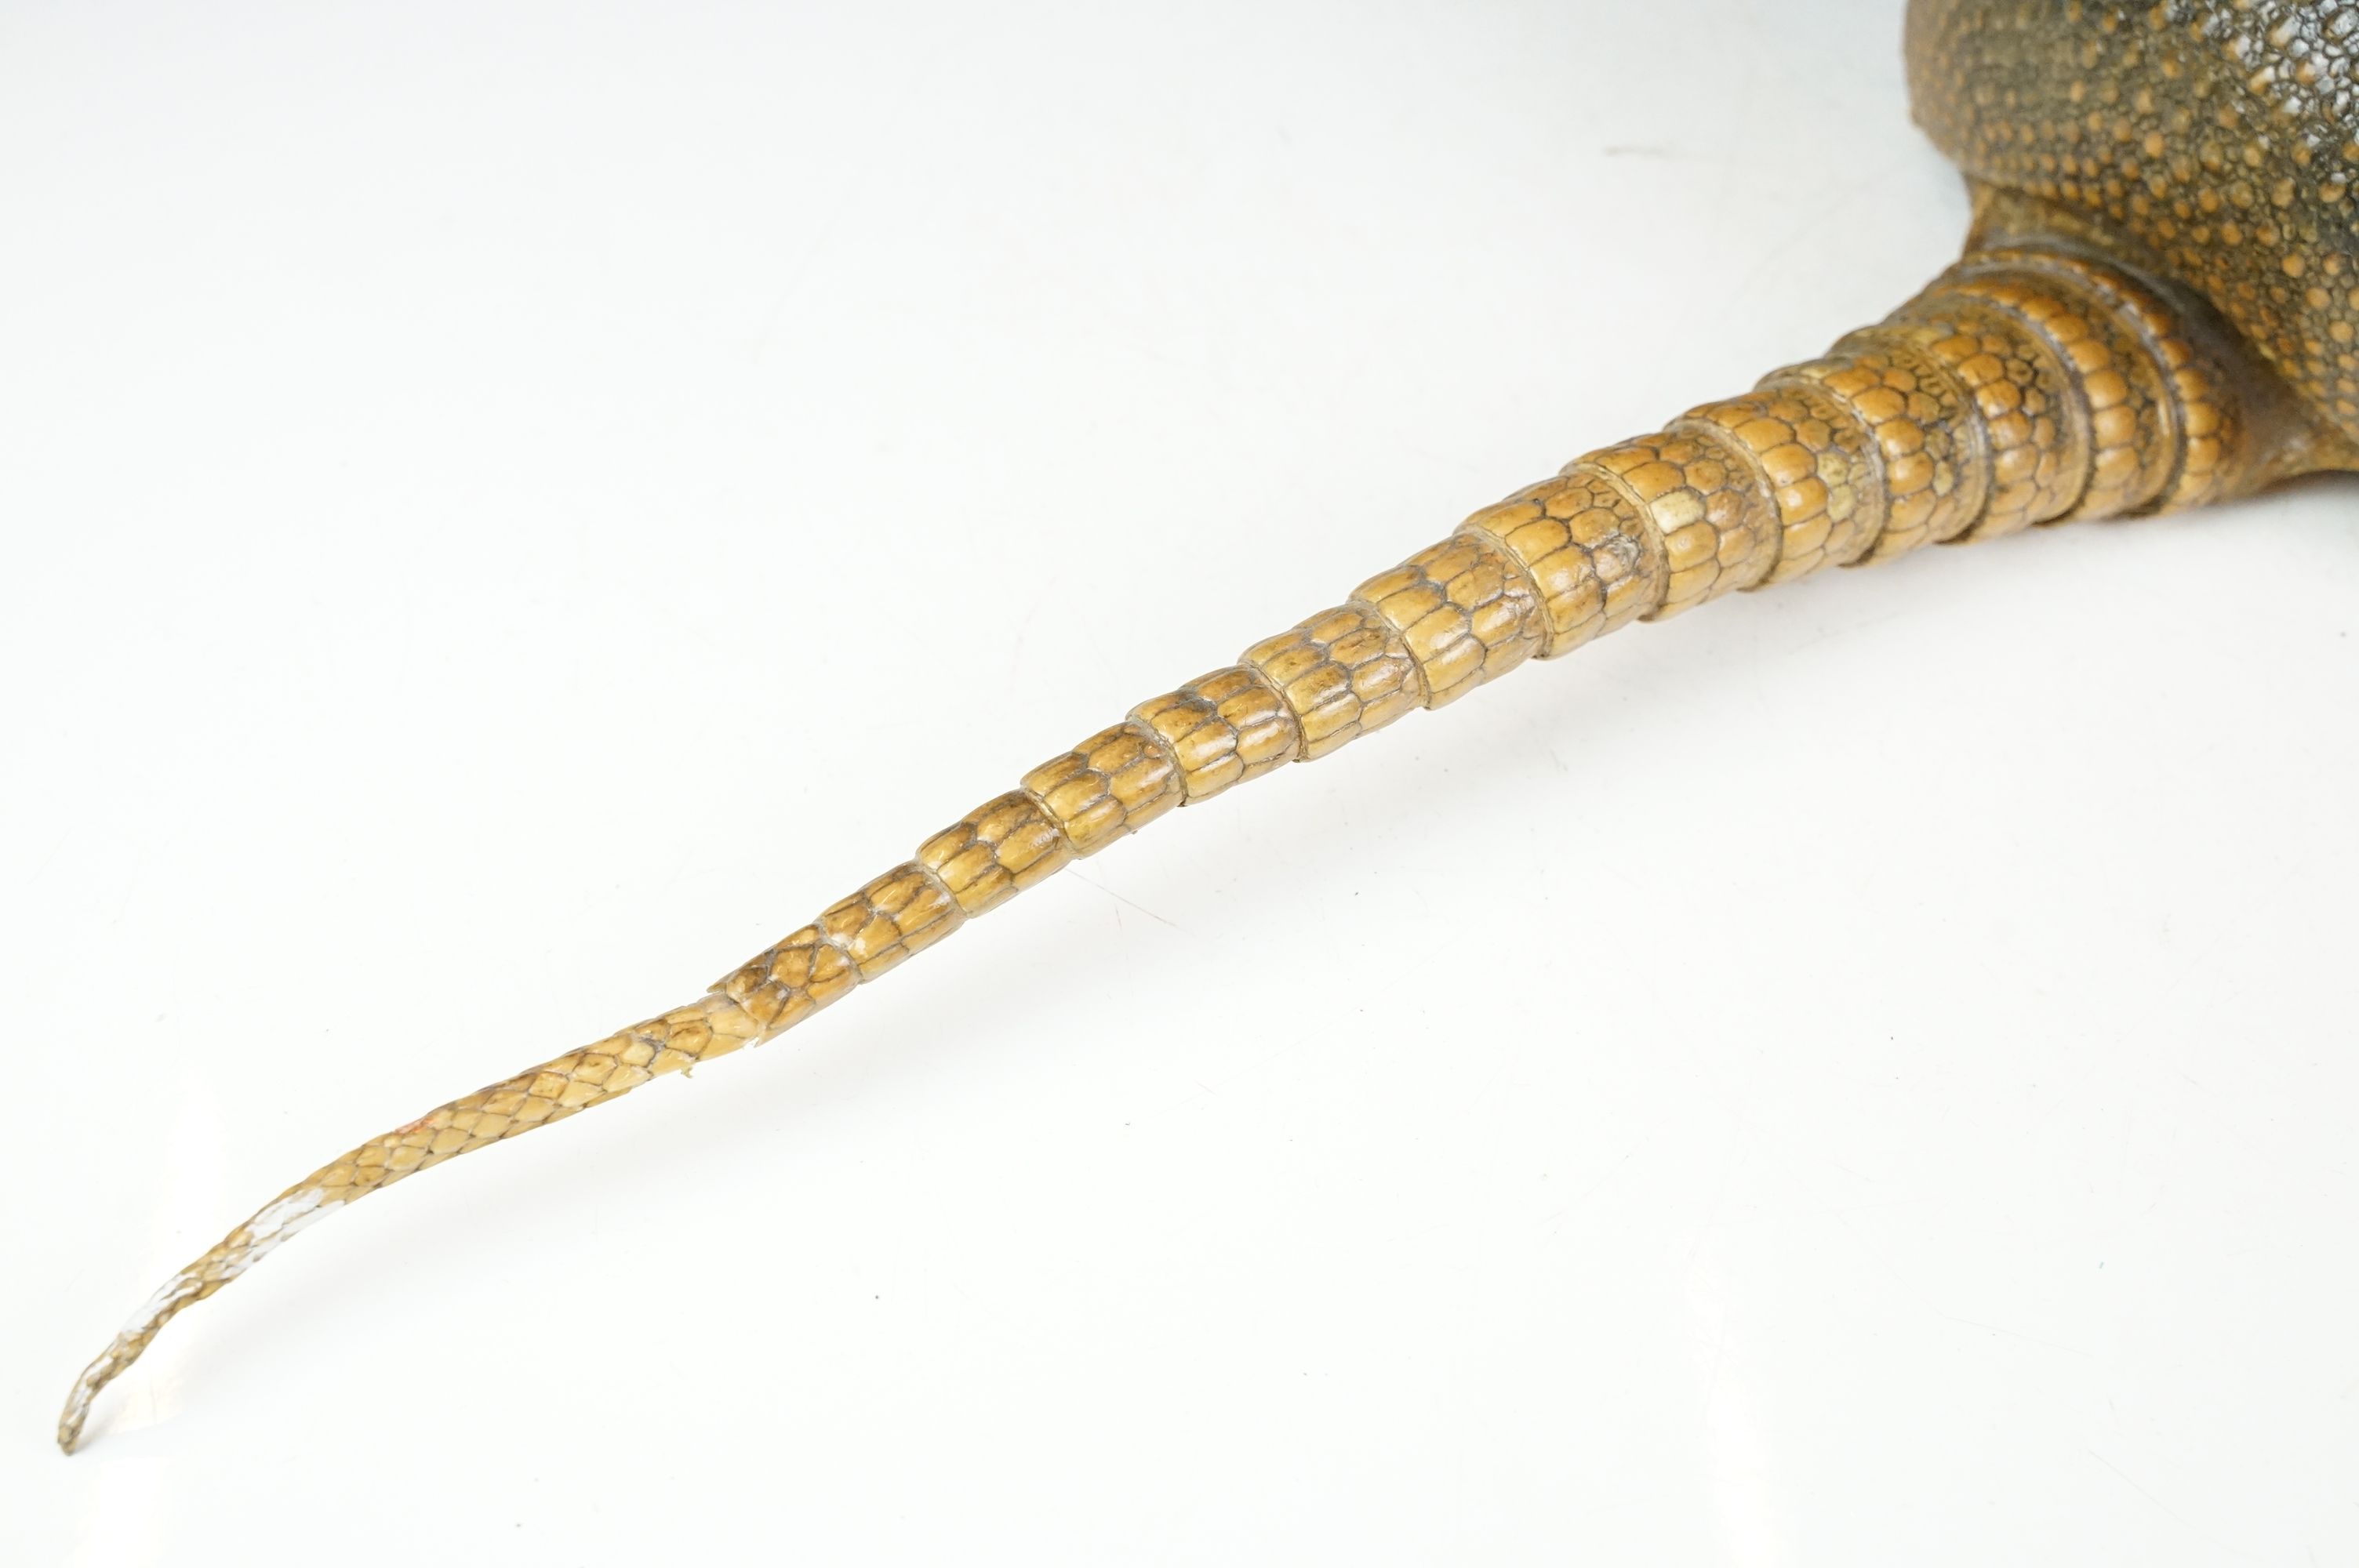 Taxidermy - A taxidermy armadillo shell, approx 68cm long - Image 8 of 11